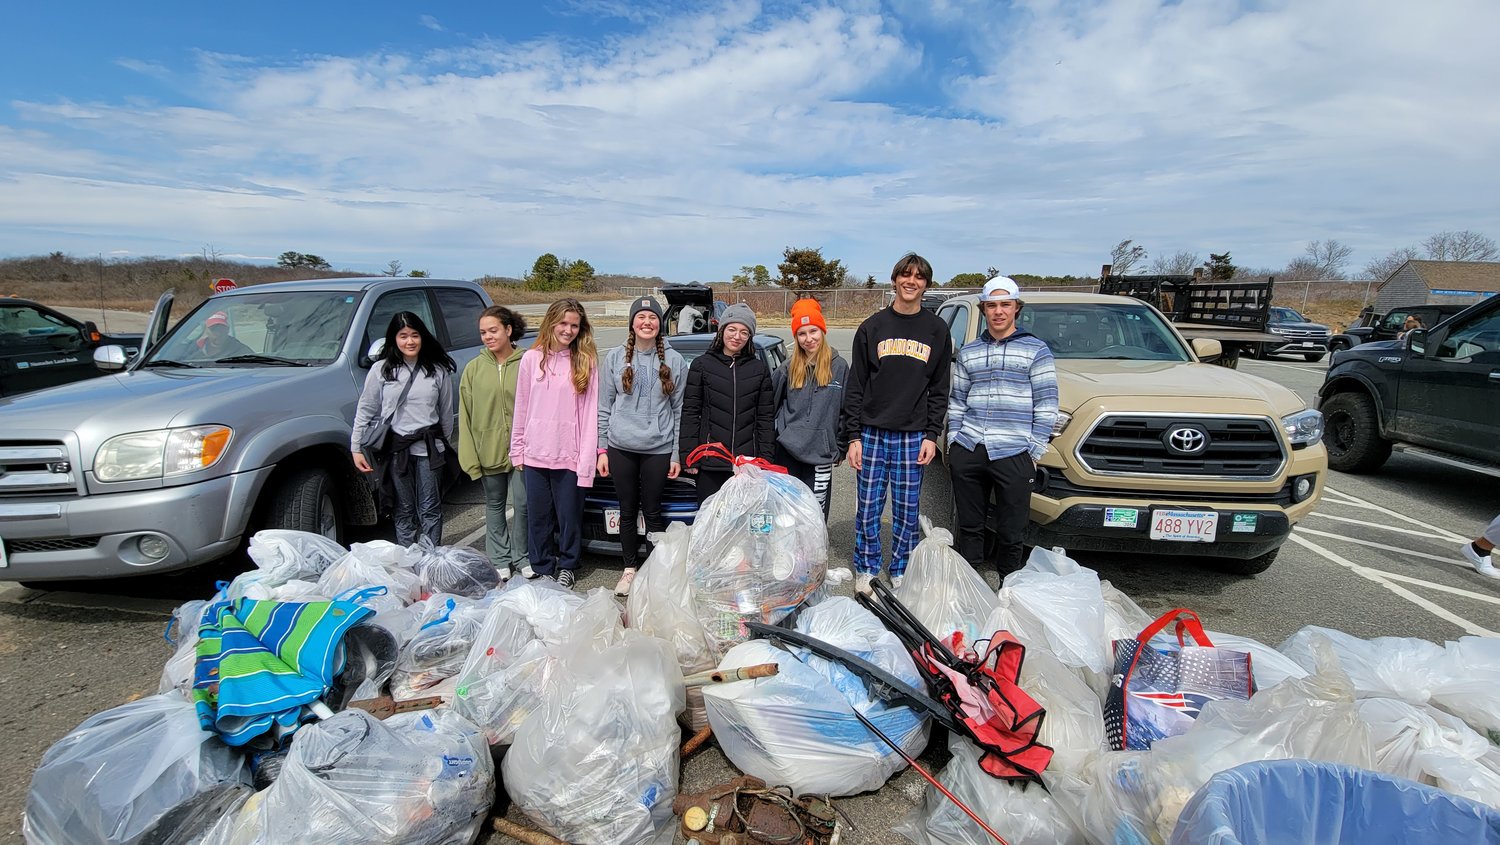 Members of Nantucket High School's National Honor Society team "Trash Talkers" and their haul they collected across the island.